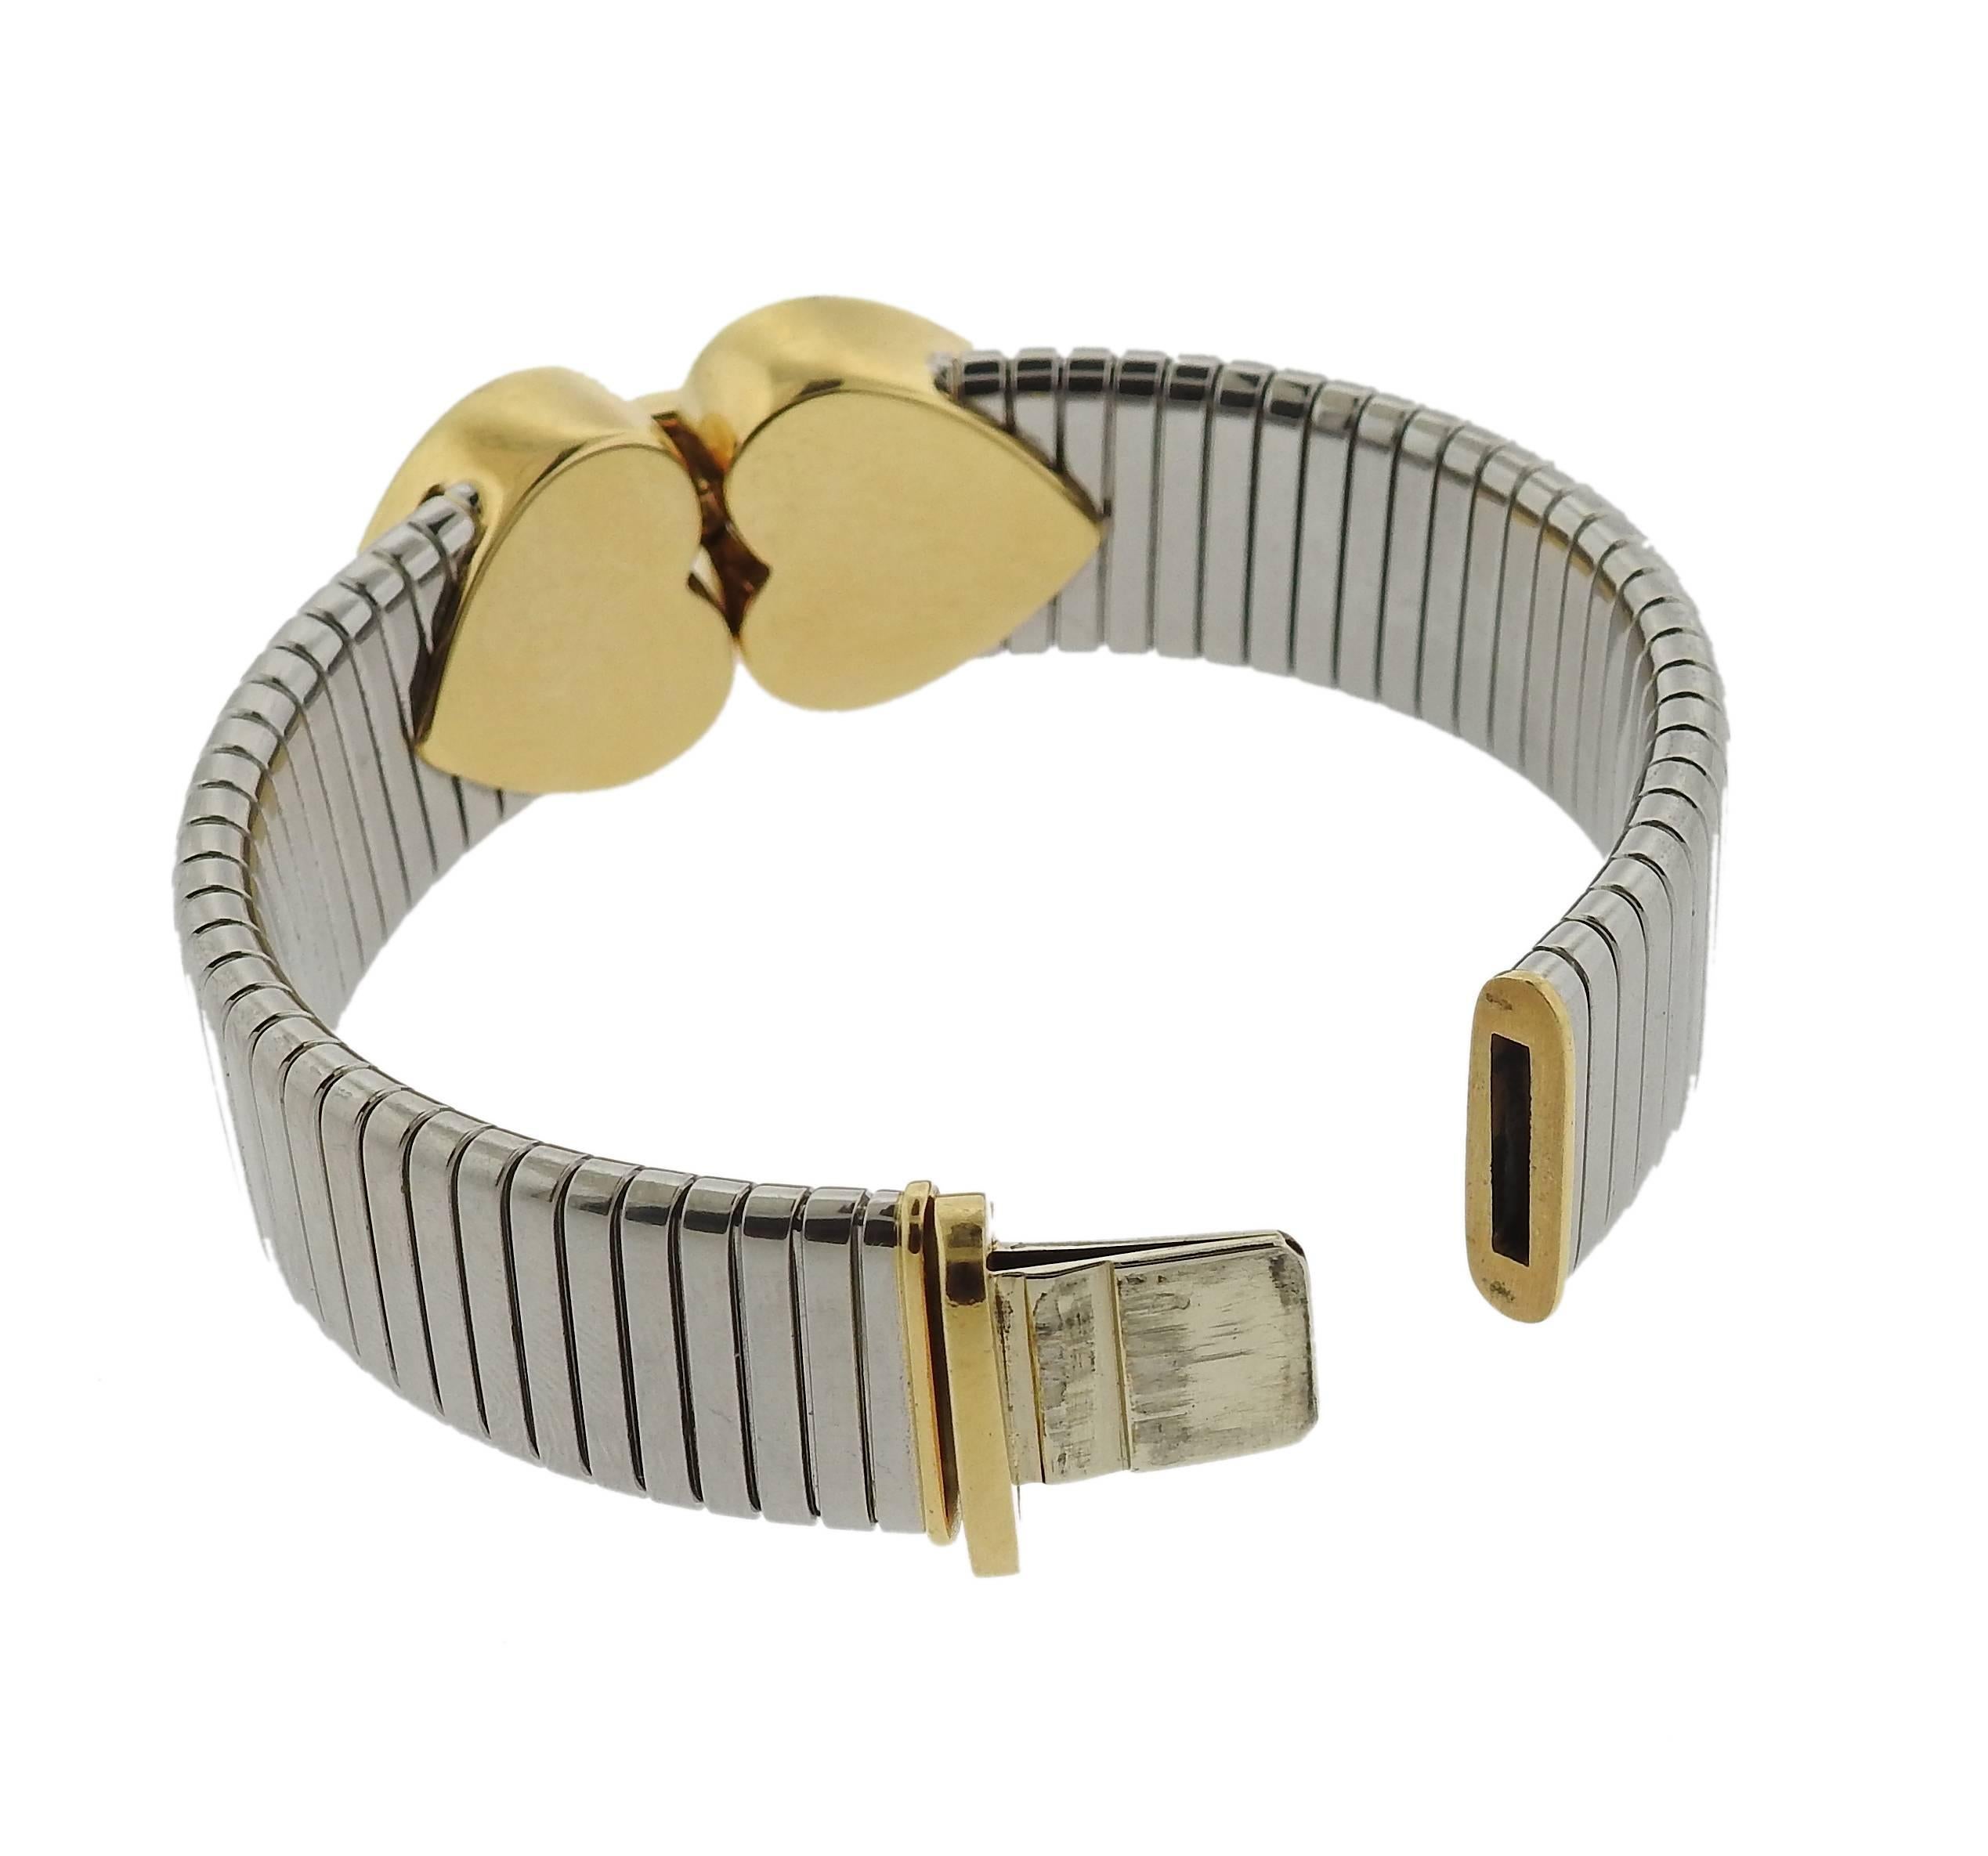 18k gold and stainless steel bracelet, crafted by Bulgari for signature Tubogas collection. Bracelet is 6 3/4" long, widest point is 20mm. Marked: Bvlgari, 750, 2337AL, ORetActer. Weight of the piece - 67.4 grams 